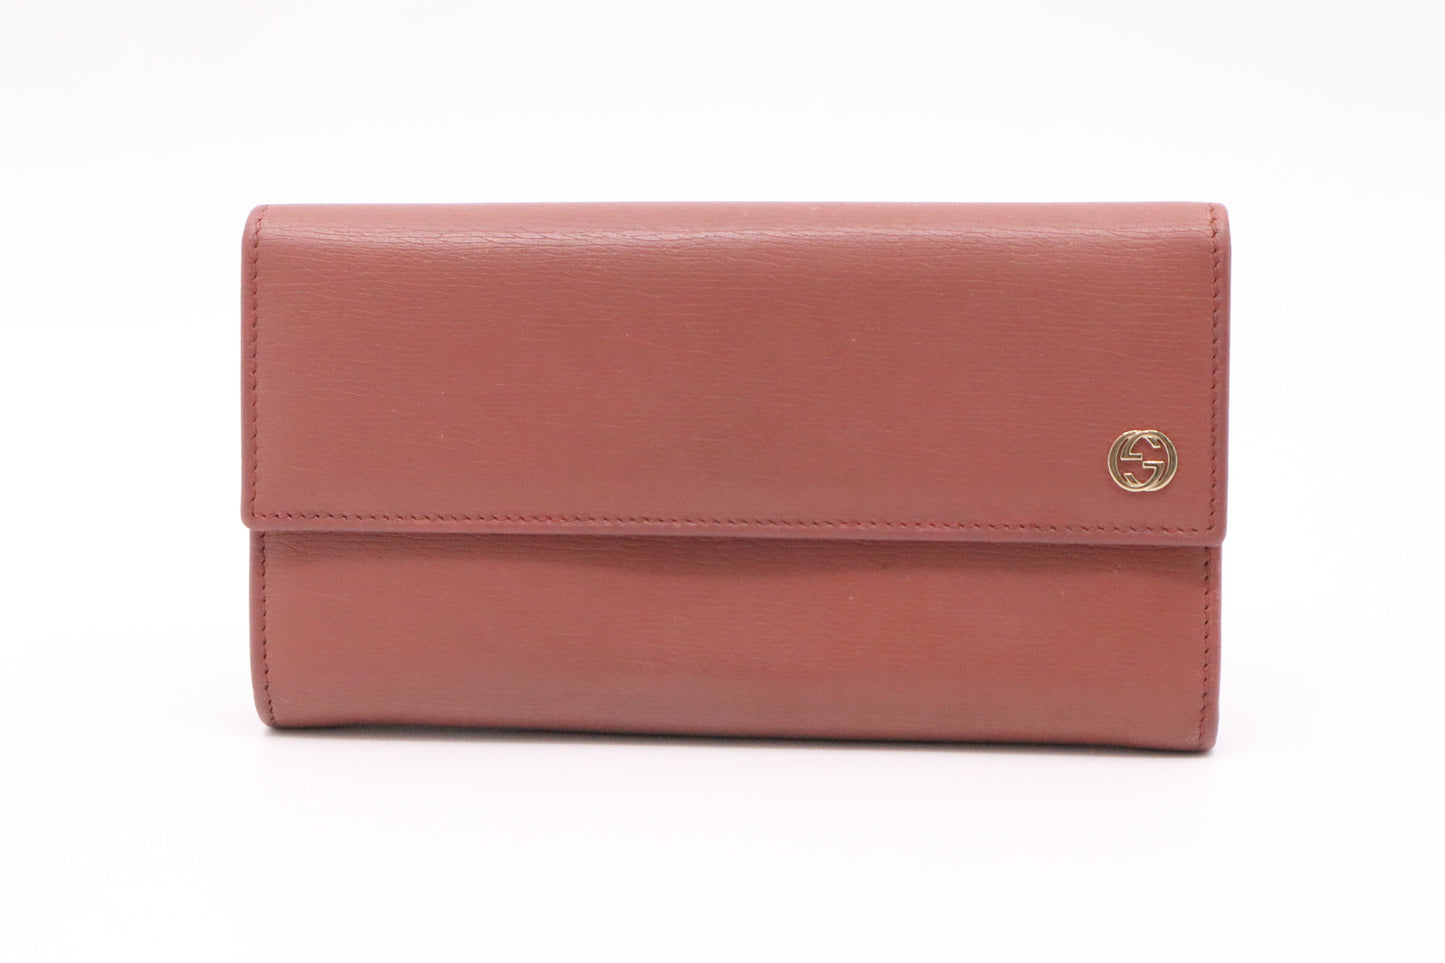 Gucci Long Wallet in Pink Leather